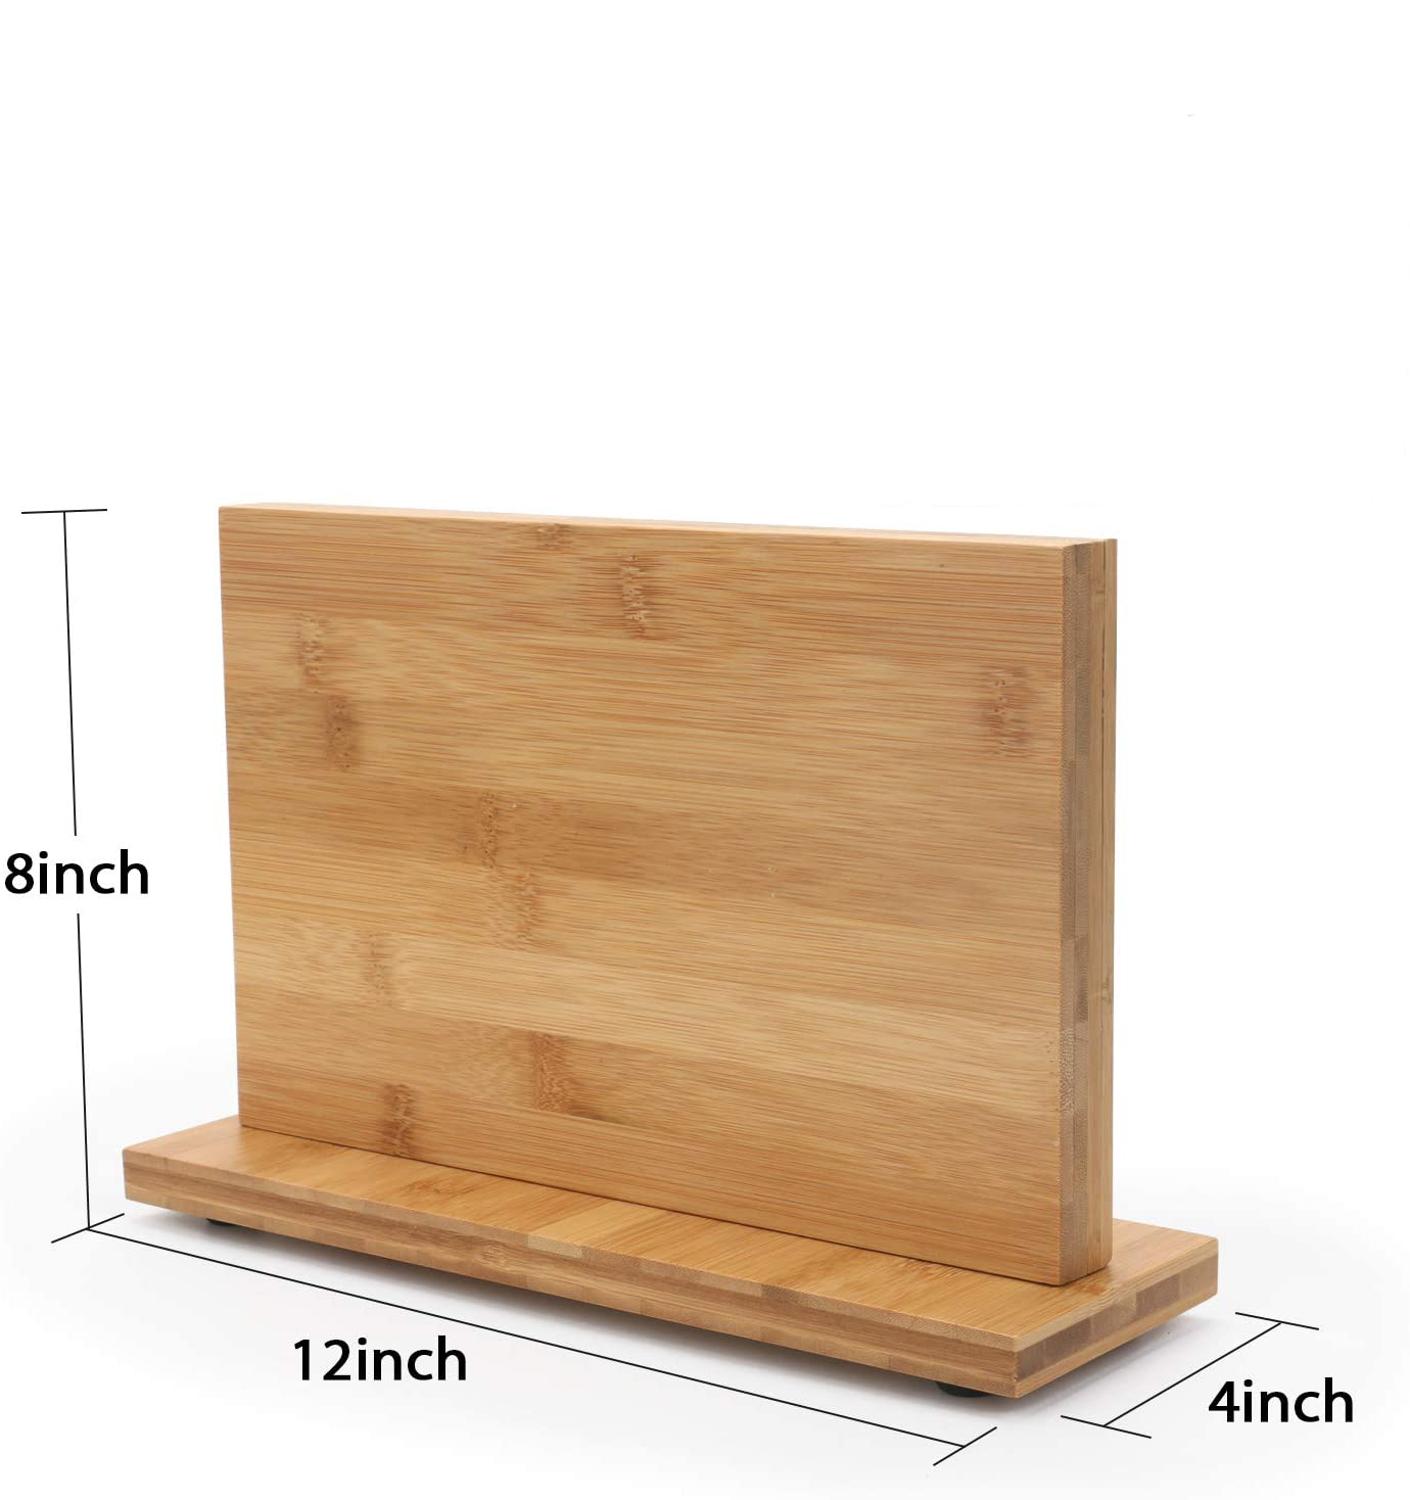 Magnetic Knife Block, Natural Bamboo Knife Holder with Strong Magnets, Double Side Cutlery Display Stand and Storage Rack